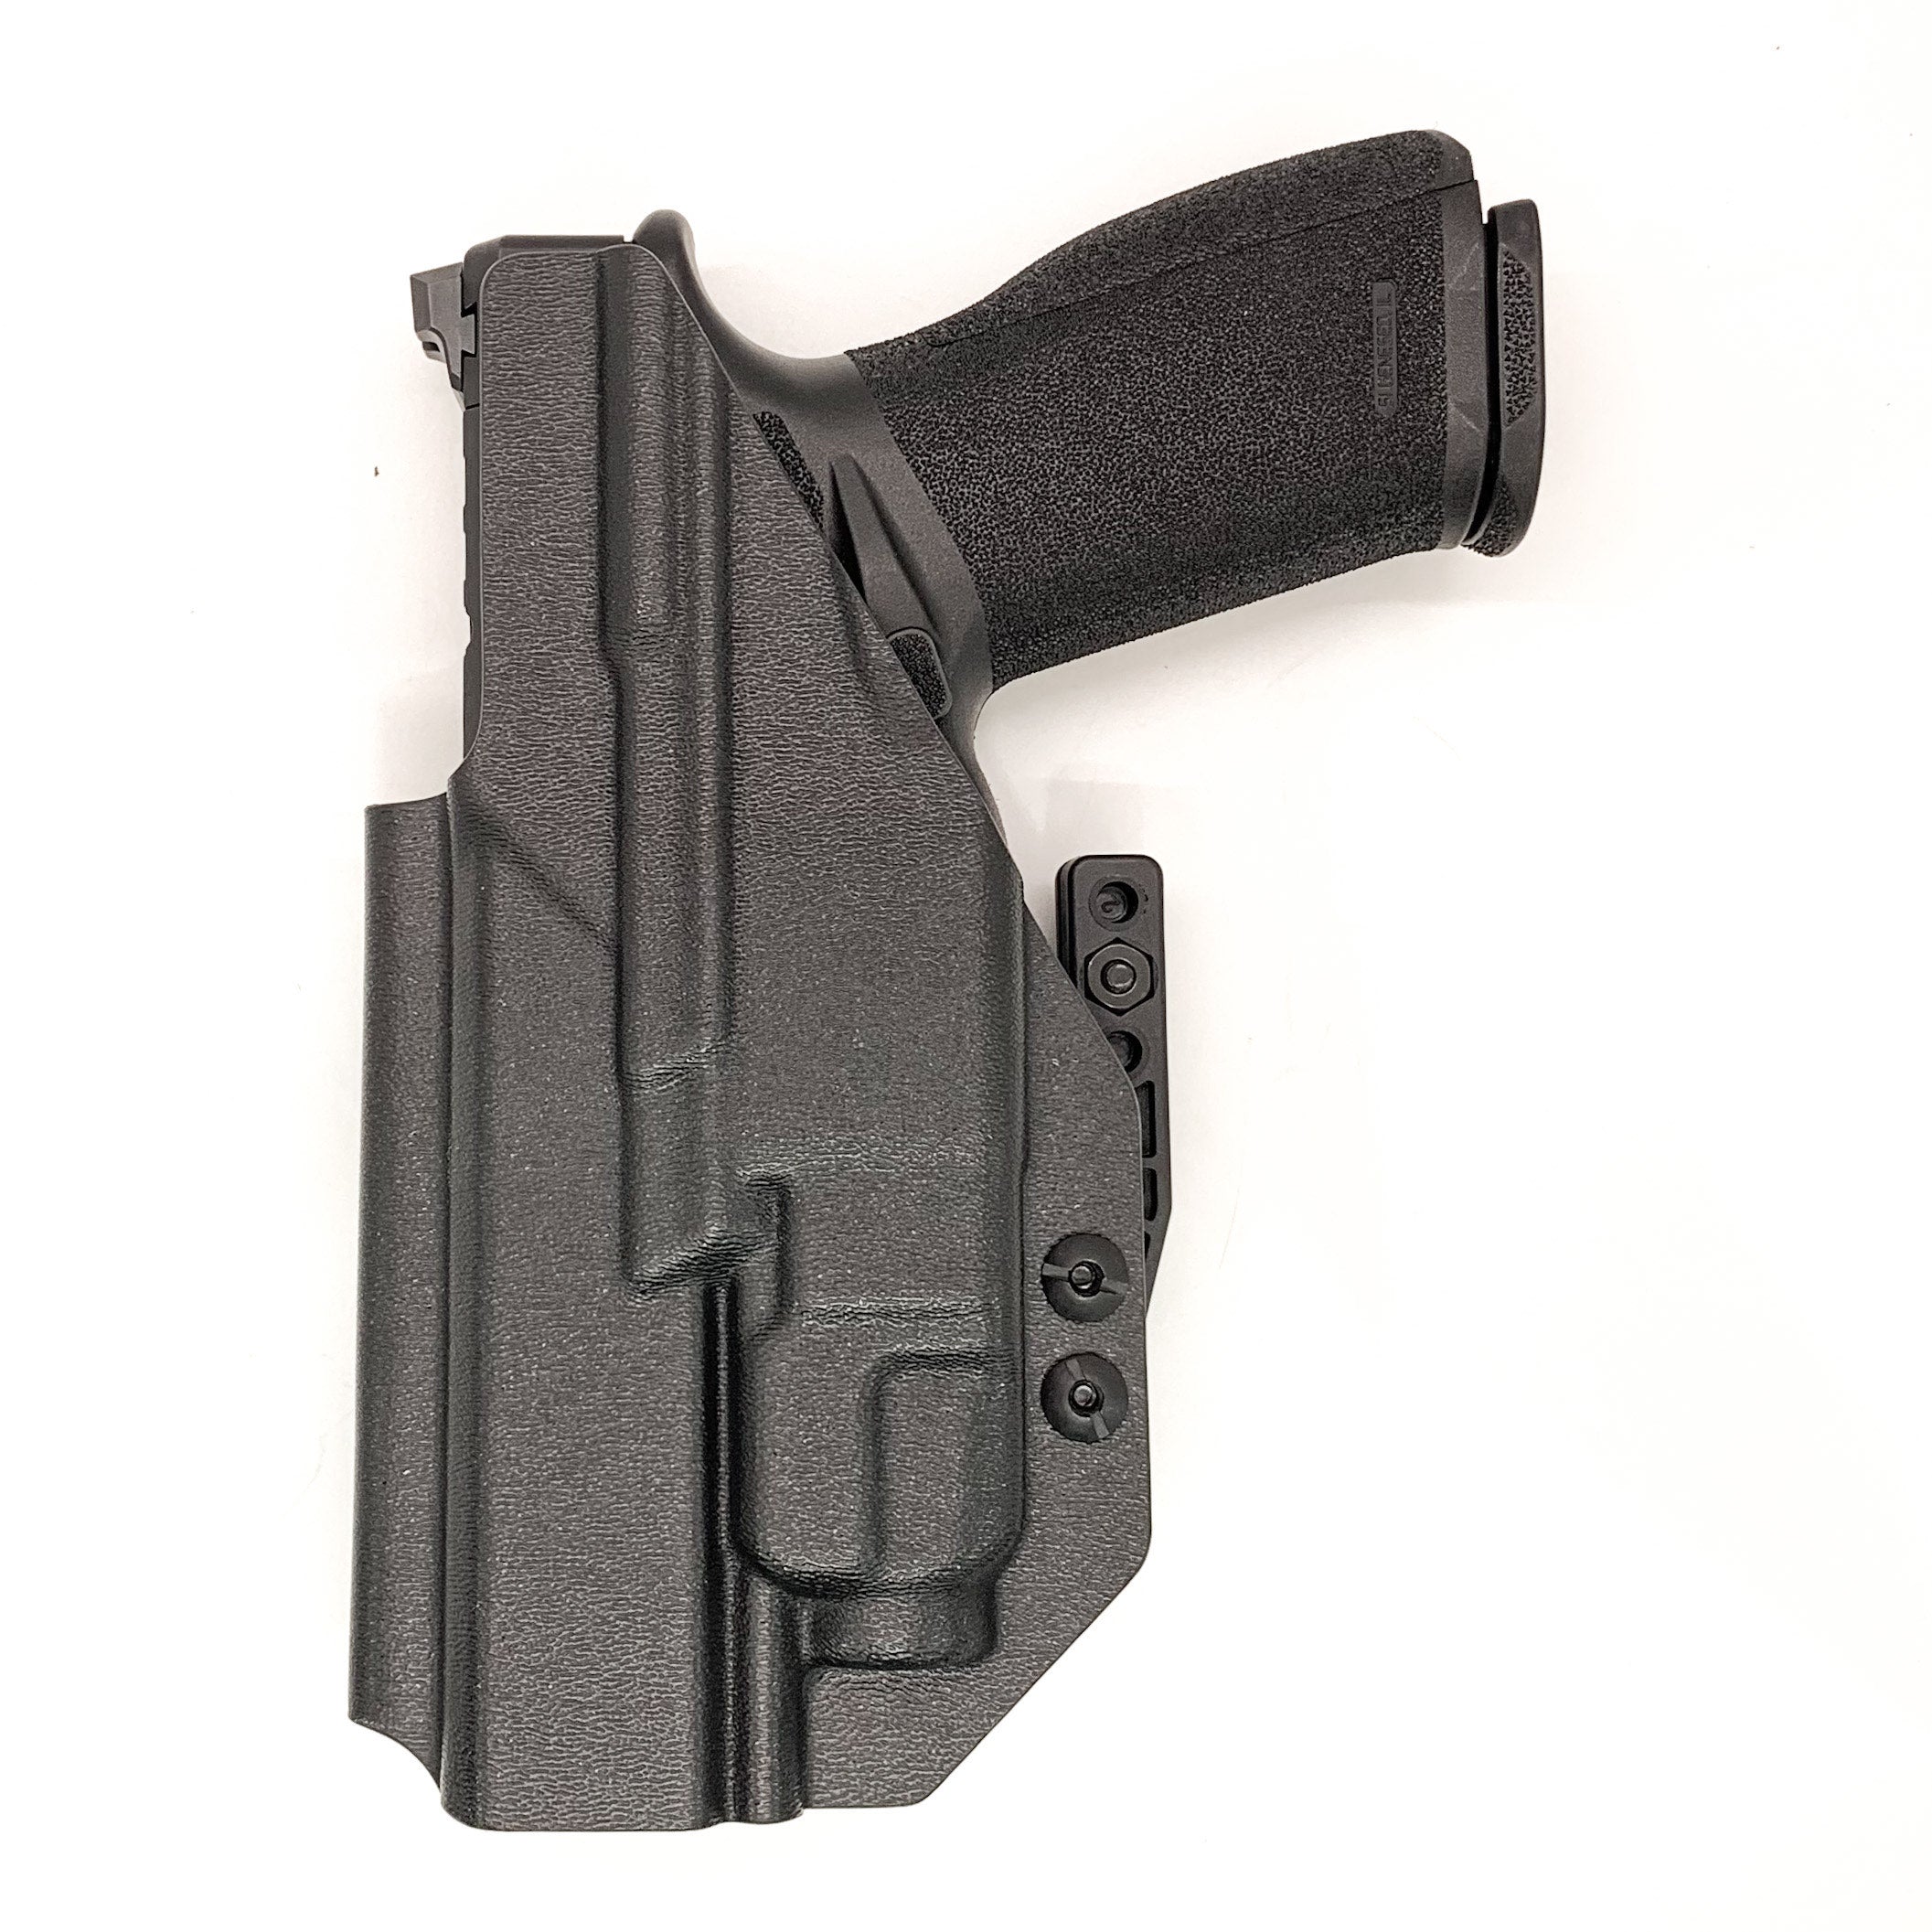 For the best IWB Inside Waistband Holster designed to fit the Springfield Armory Echelon and Streamlight TLR-7A, shop Four Brothers Holsters.  Full sweat guard, adjustable retention, clear dor a red dot sight, minimal material & smooth edges to reduce printing. Proudly made in the USA by veterans and law enforcement. 